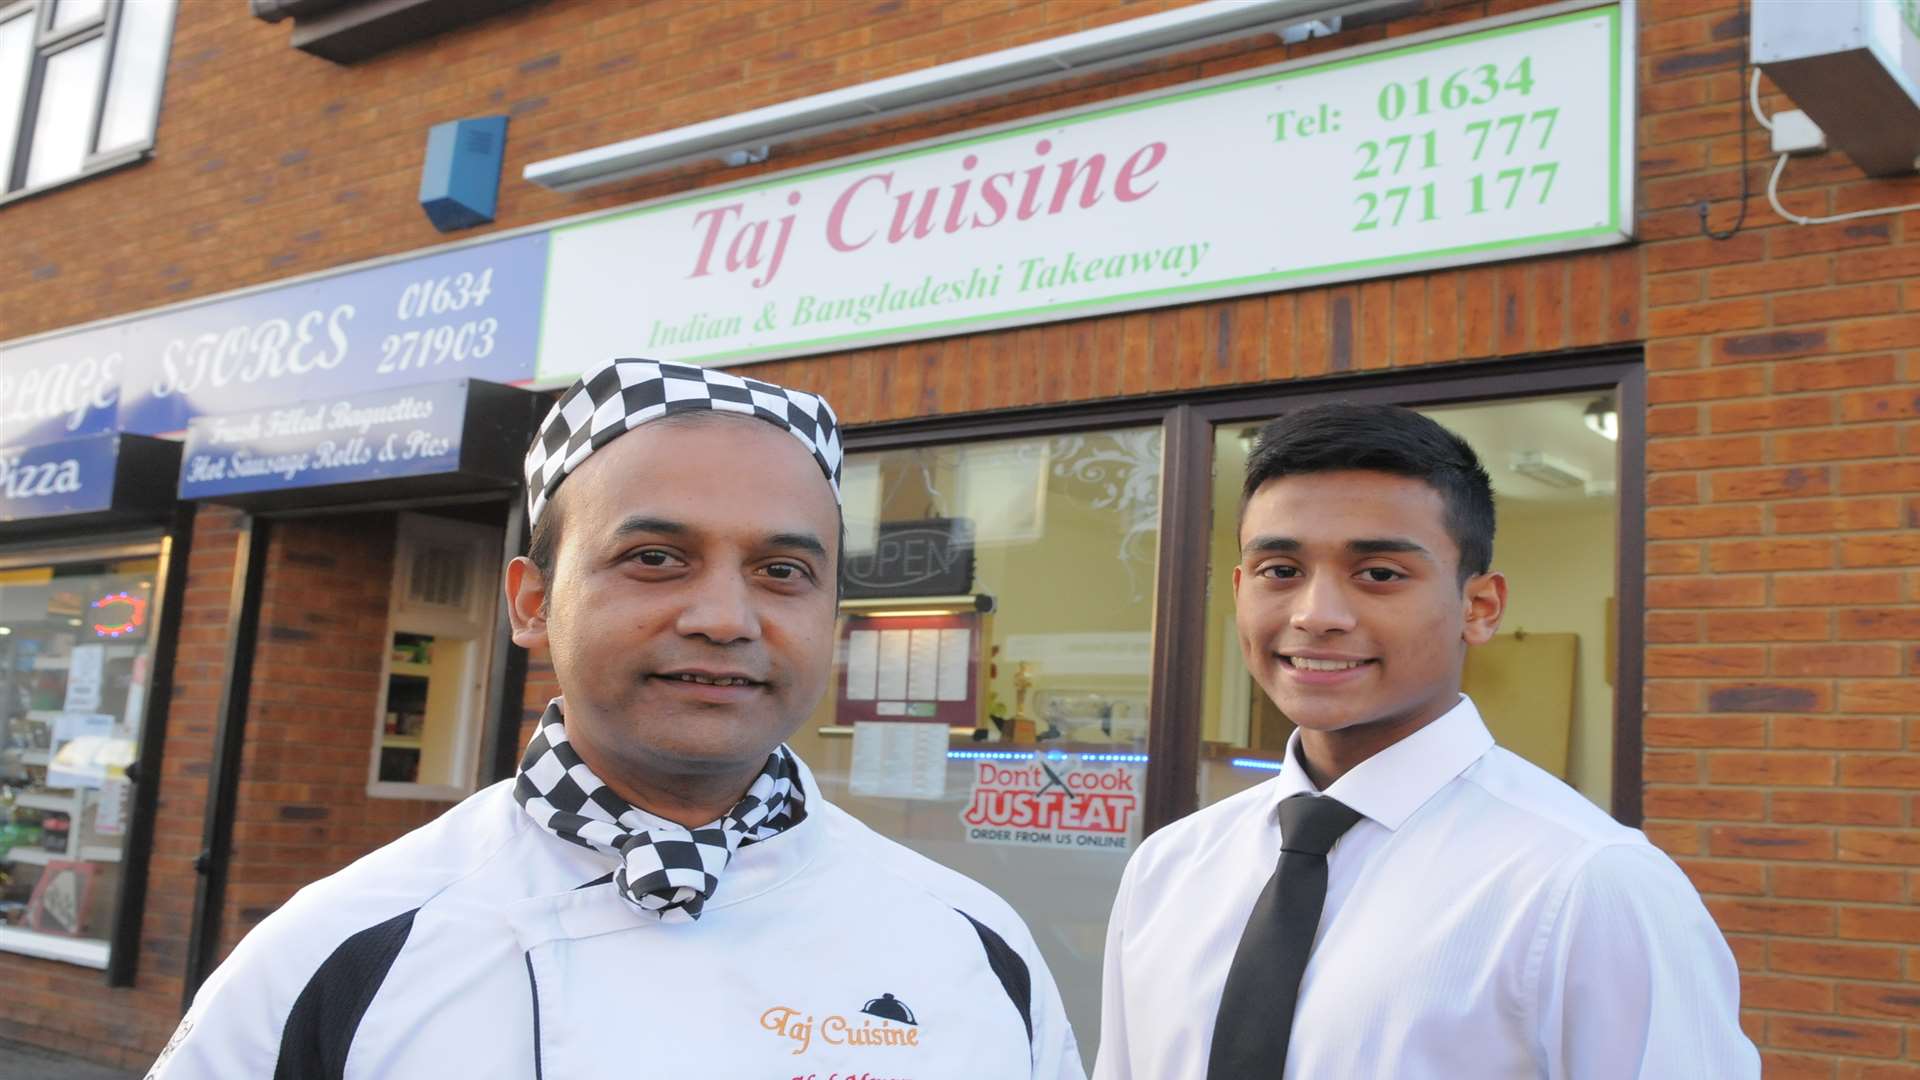 Abul Monsur with his son Rahath Monsur, outside the Taj Cuisine which is ready for Christmas